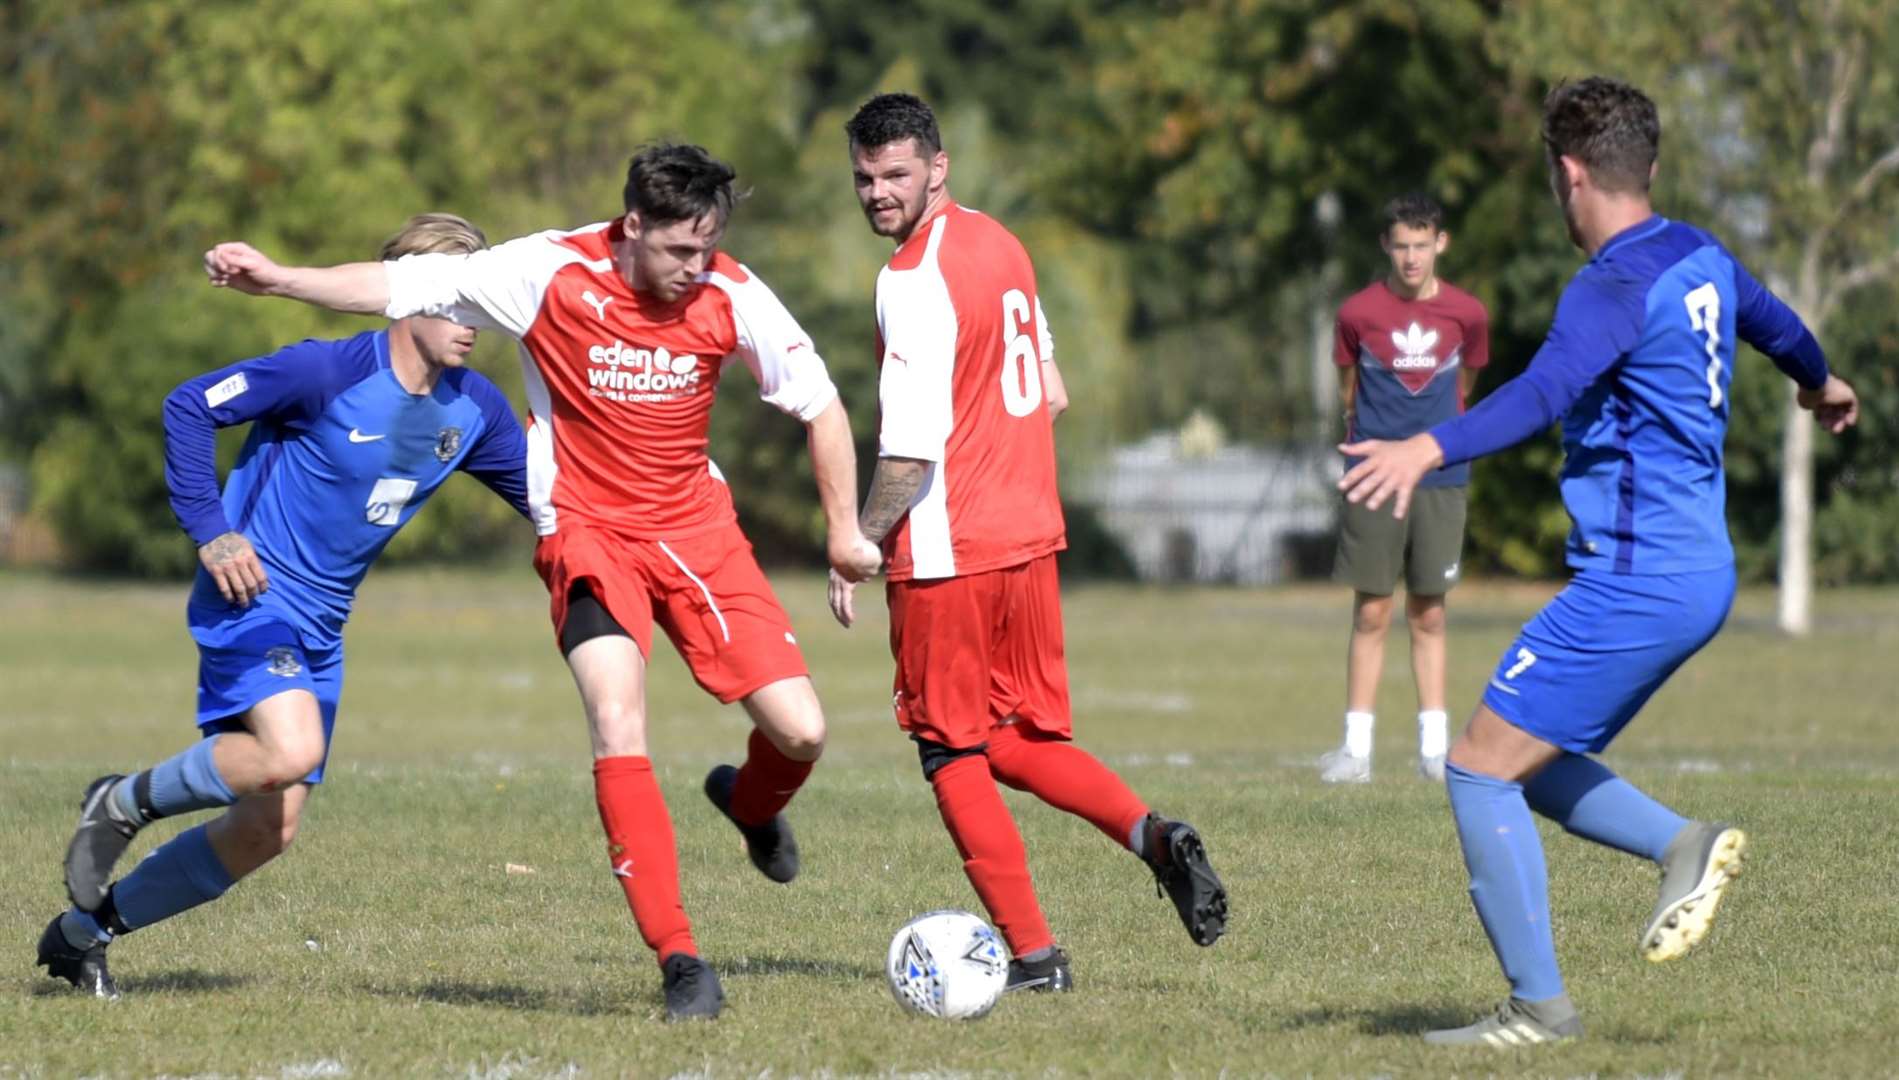 Rainham Kenilworth Rangers (red) on the ball during their 4-2 win over Medway United Central. Picture: Barry Goodwin (42331330)